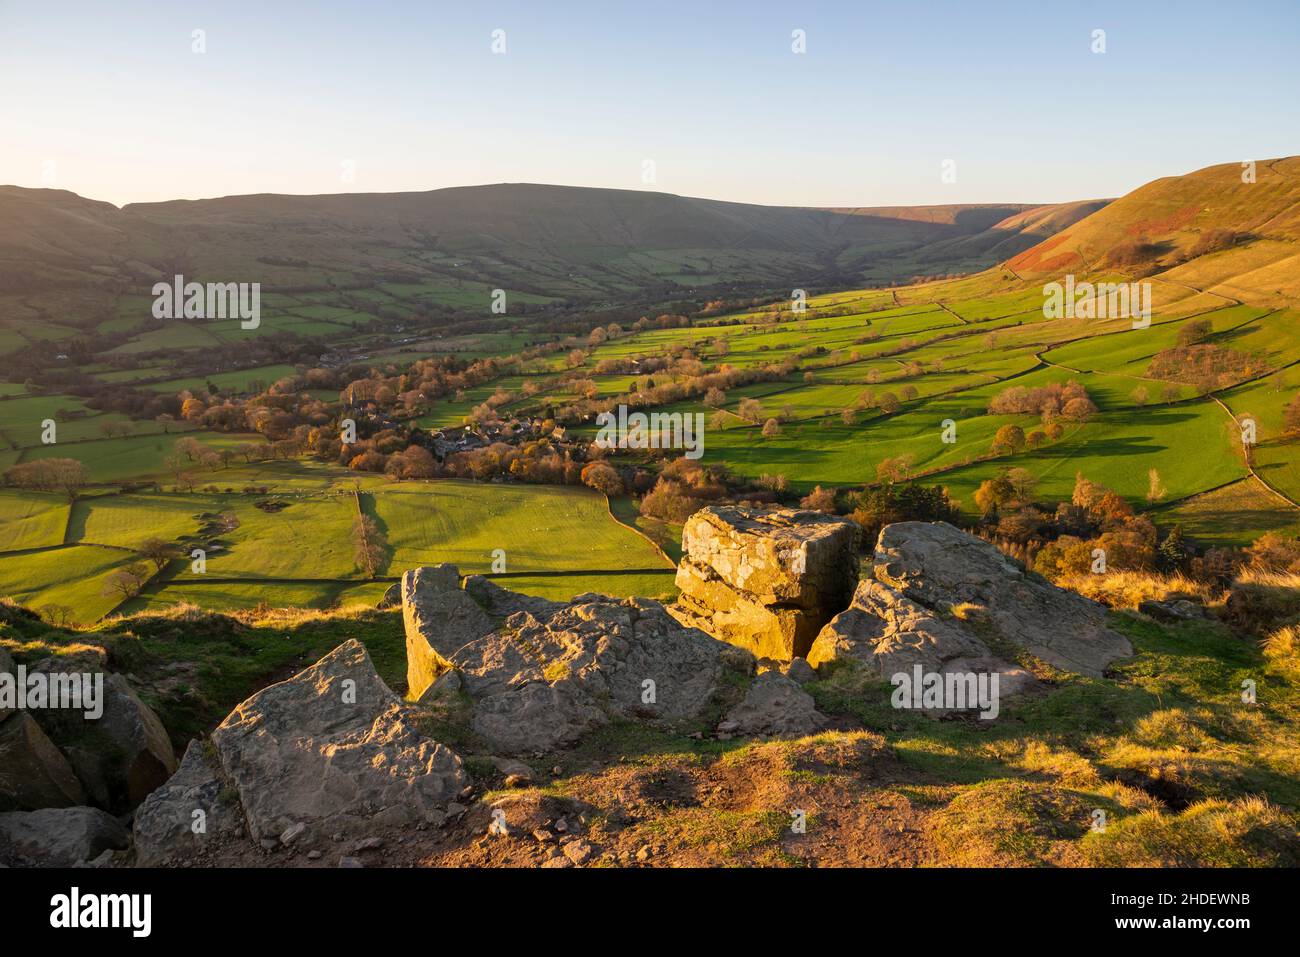 View of the Vale of Edale, Derbyshire from path below Ringing Roger on the edge of Kinder Scout in the Peak District. A sunny November morning. Stock Photo